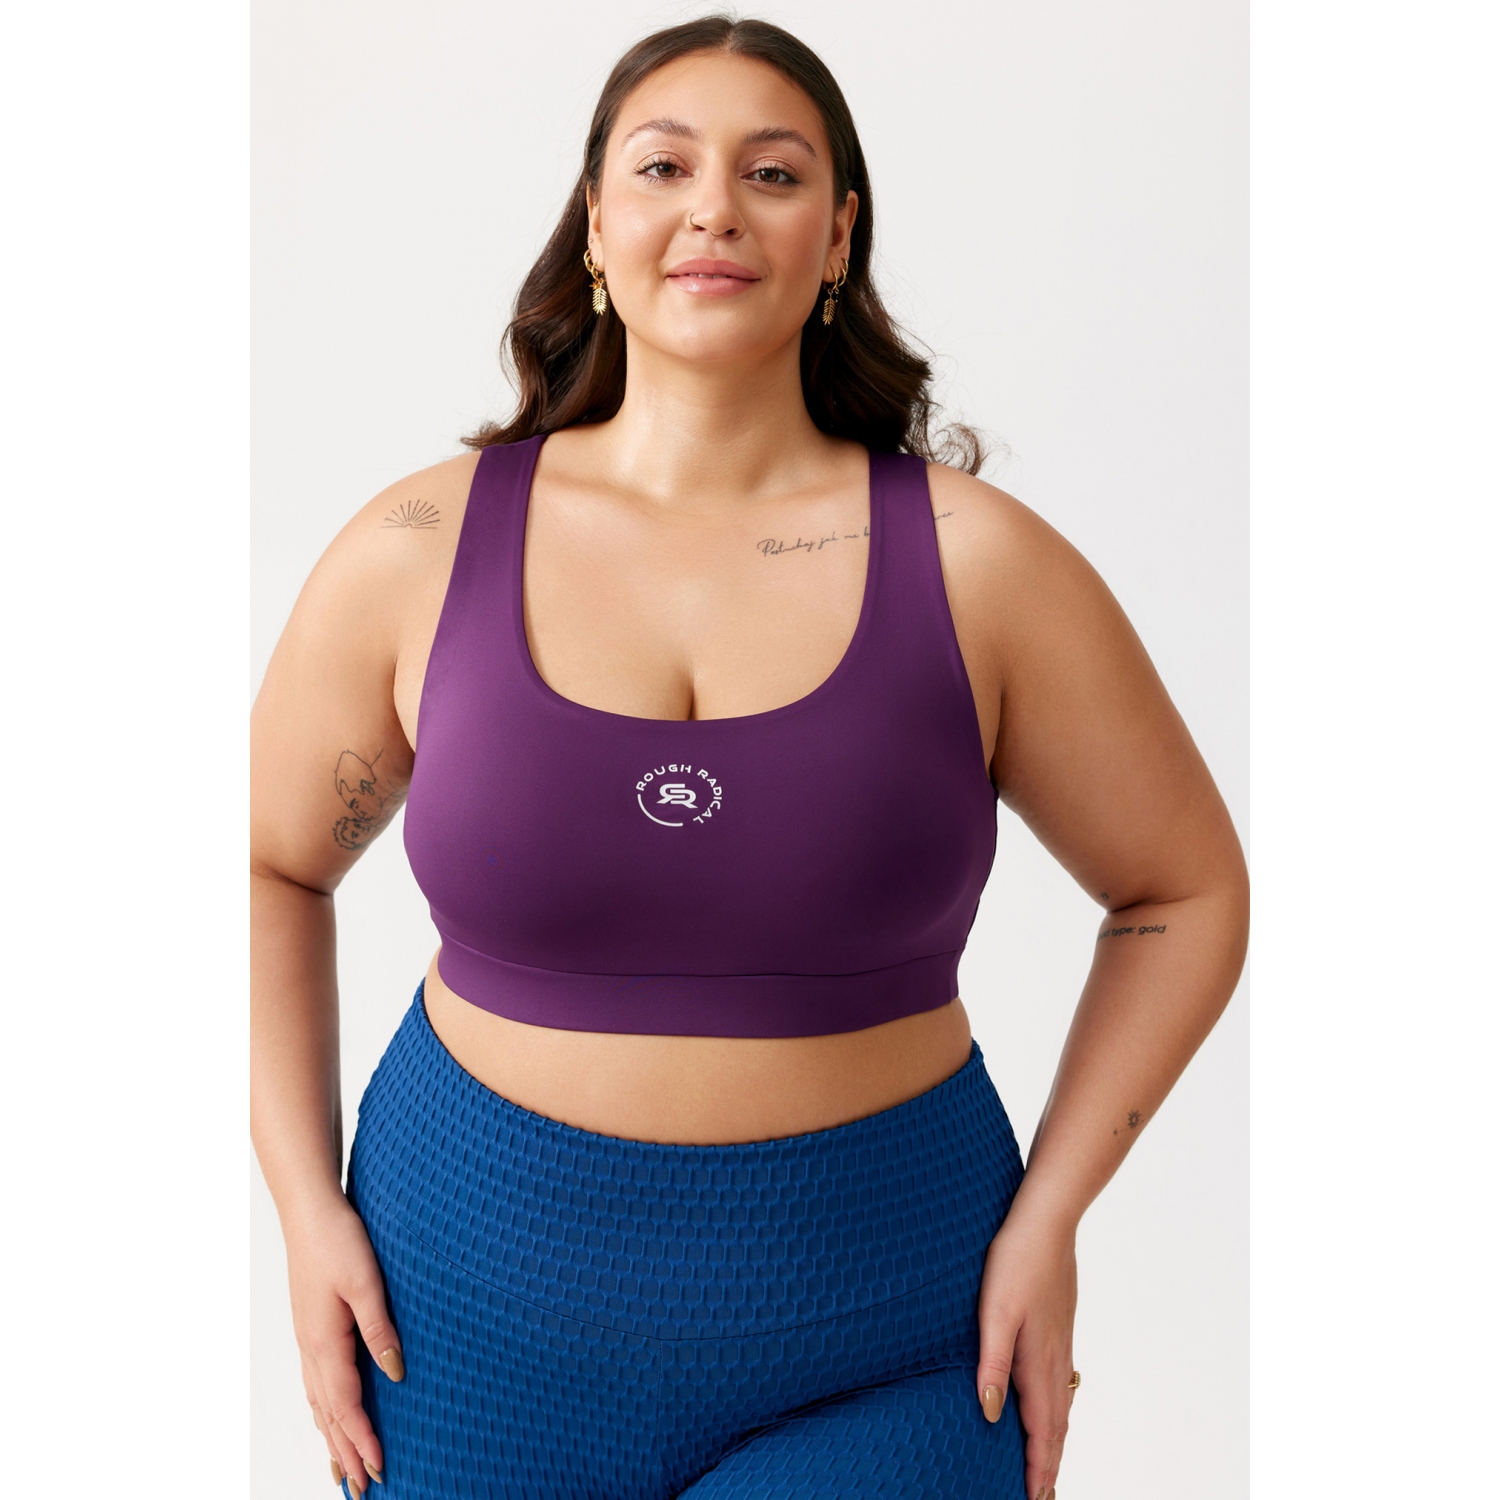 https://roughradical.com.pl/9521-full_product/stiffened-sports-bra-sporting-plus-size.jpg